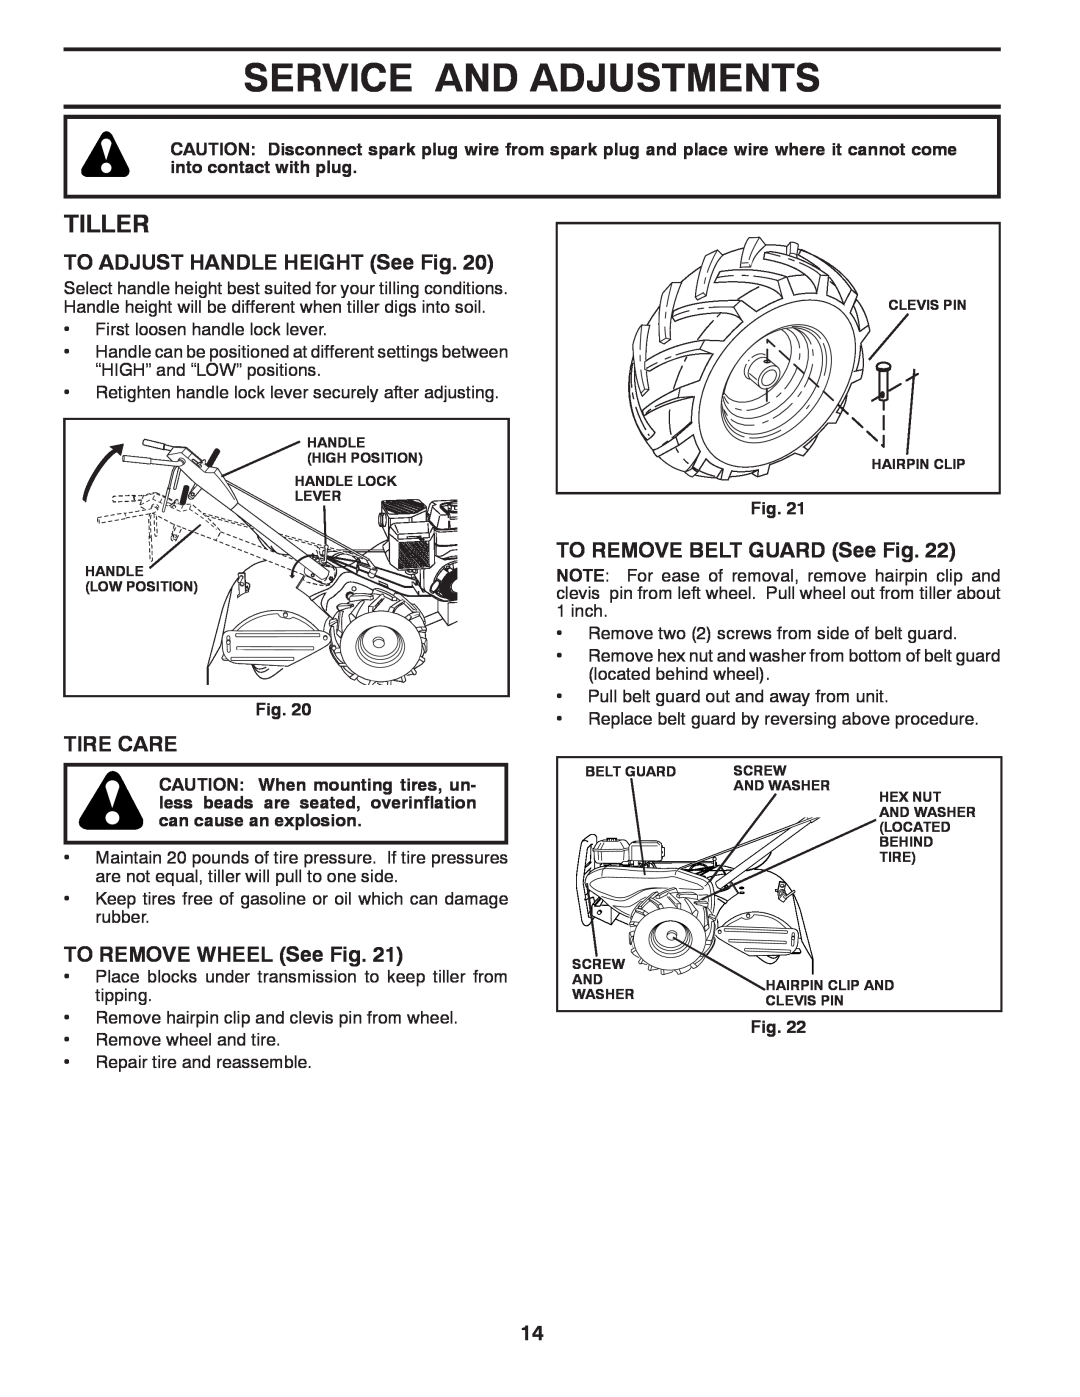 Poulan 433107 Service And Adjustments, Tiller, TO ADJUST HANDLE HEIGHT See Fig, TO REMOVE BELT GUARD See Fig, Tire Care 